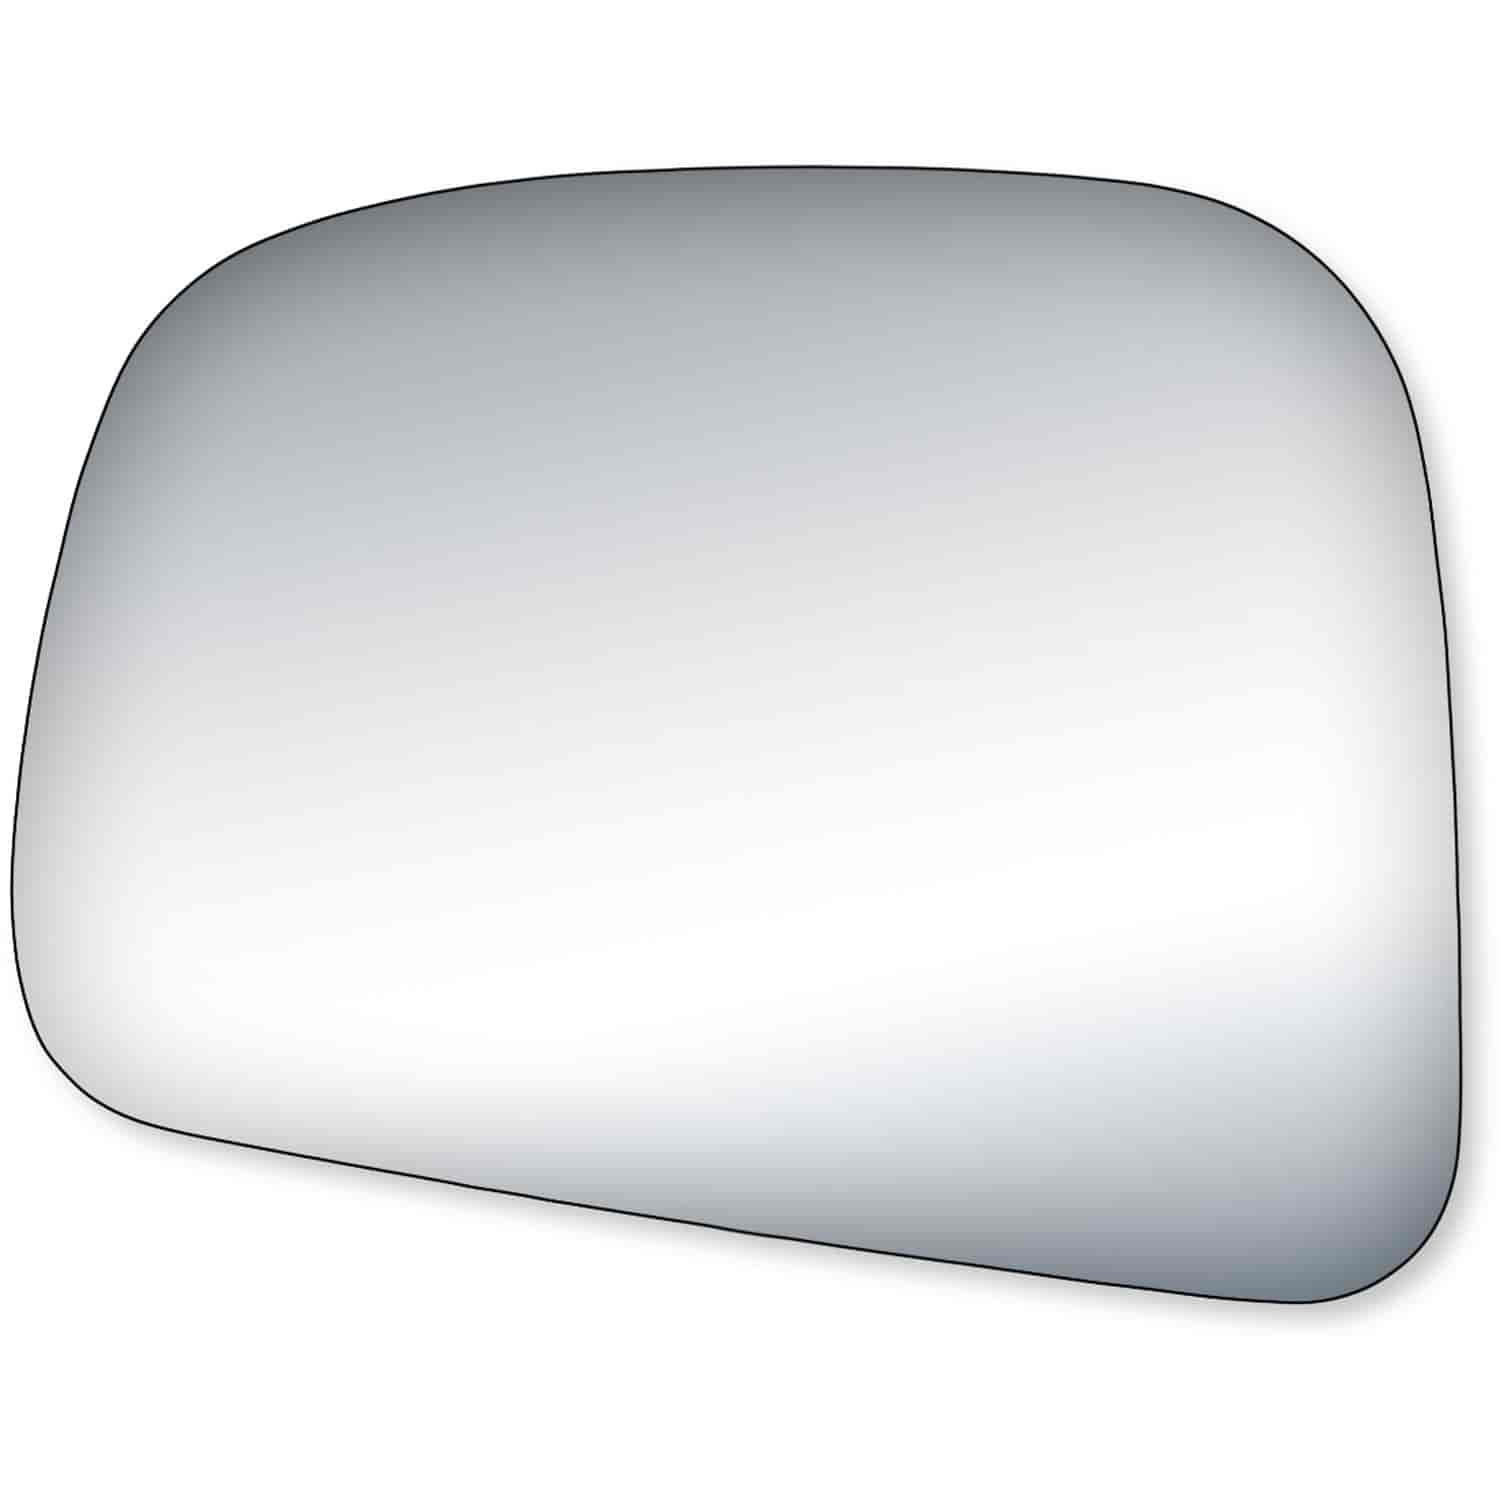 Replacement Glass for 07-12 Versa Hatchback/ Sedan the glass measures 4 13/16 tall by 6 1/2 wide and